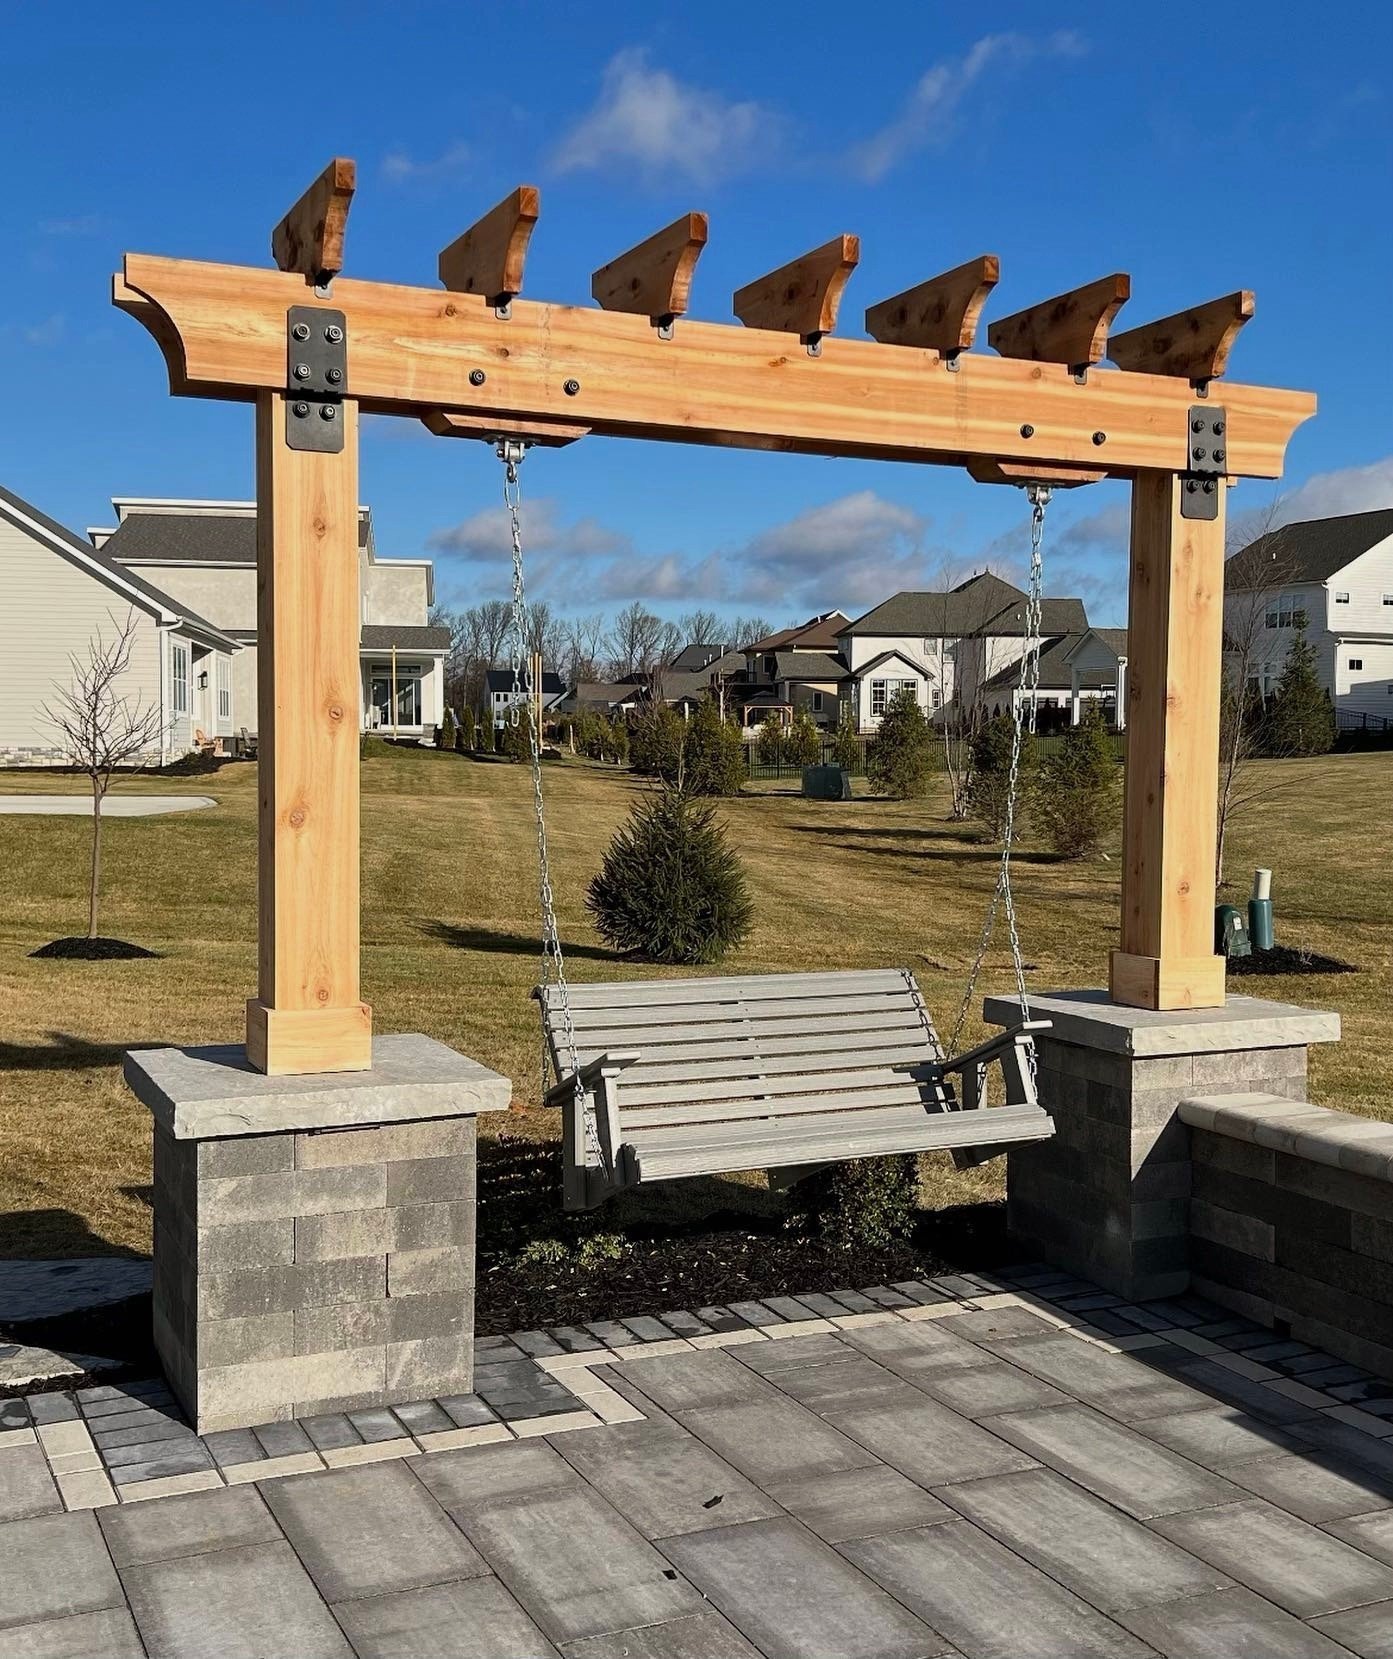 When it comes to landscaping, a swing is never a miss.

#columbushomes #yardrenovation #ohiohomes #columbushomes #columbuslife #lifein614 #backyardlounge #loungechairs